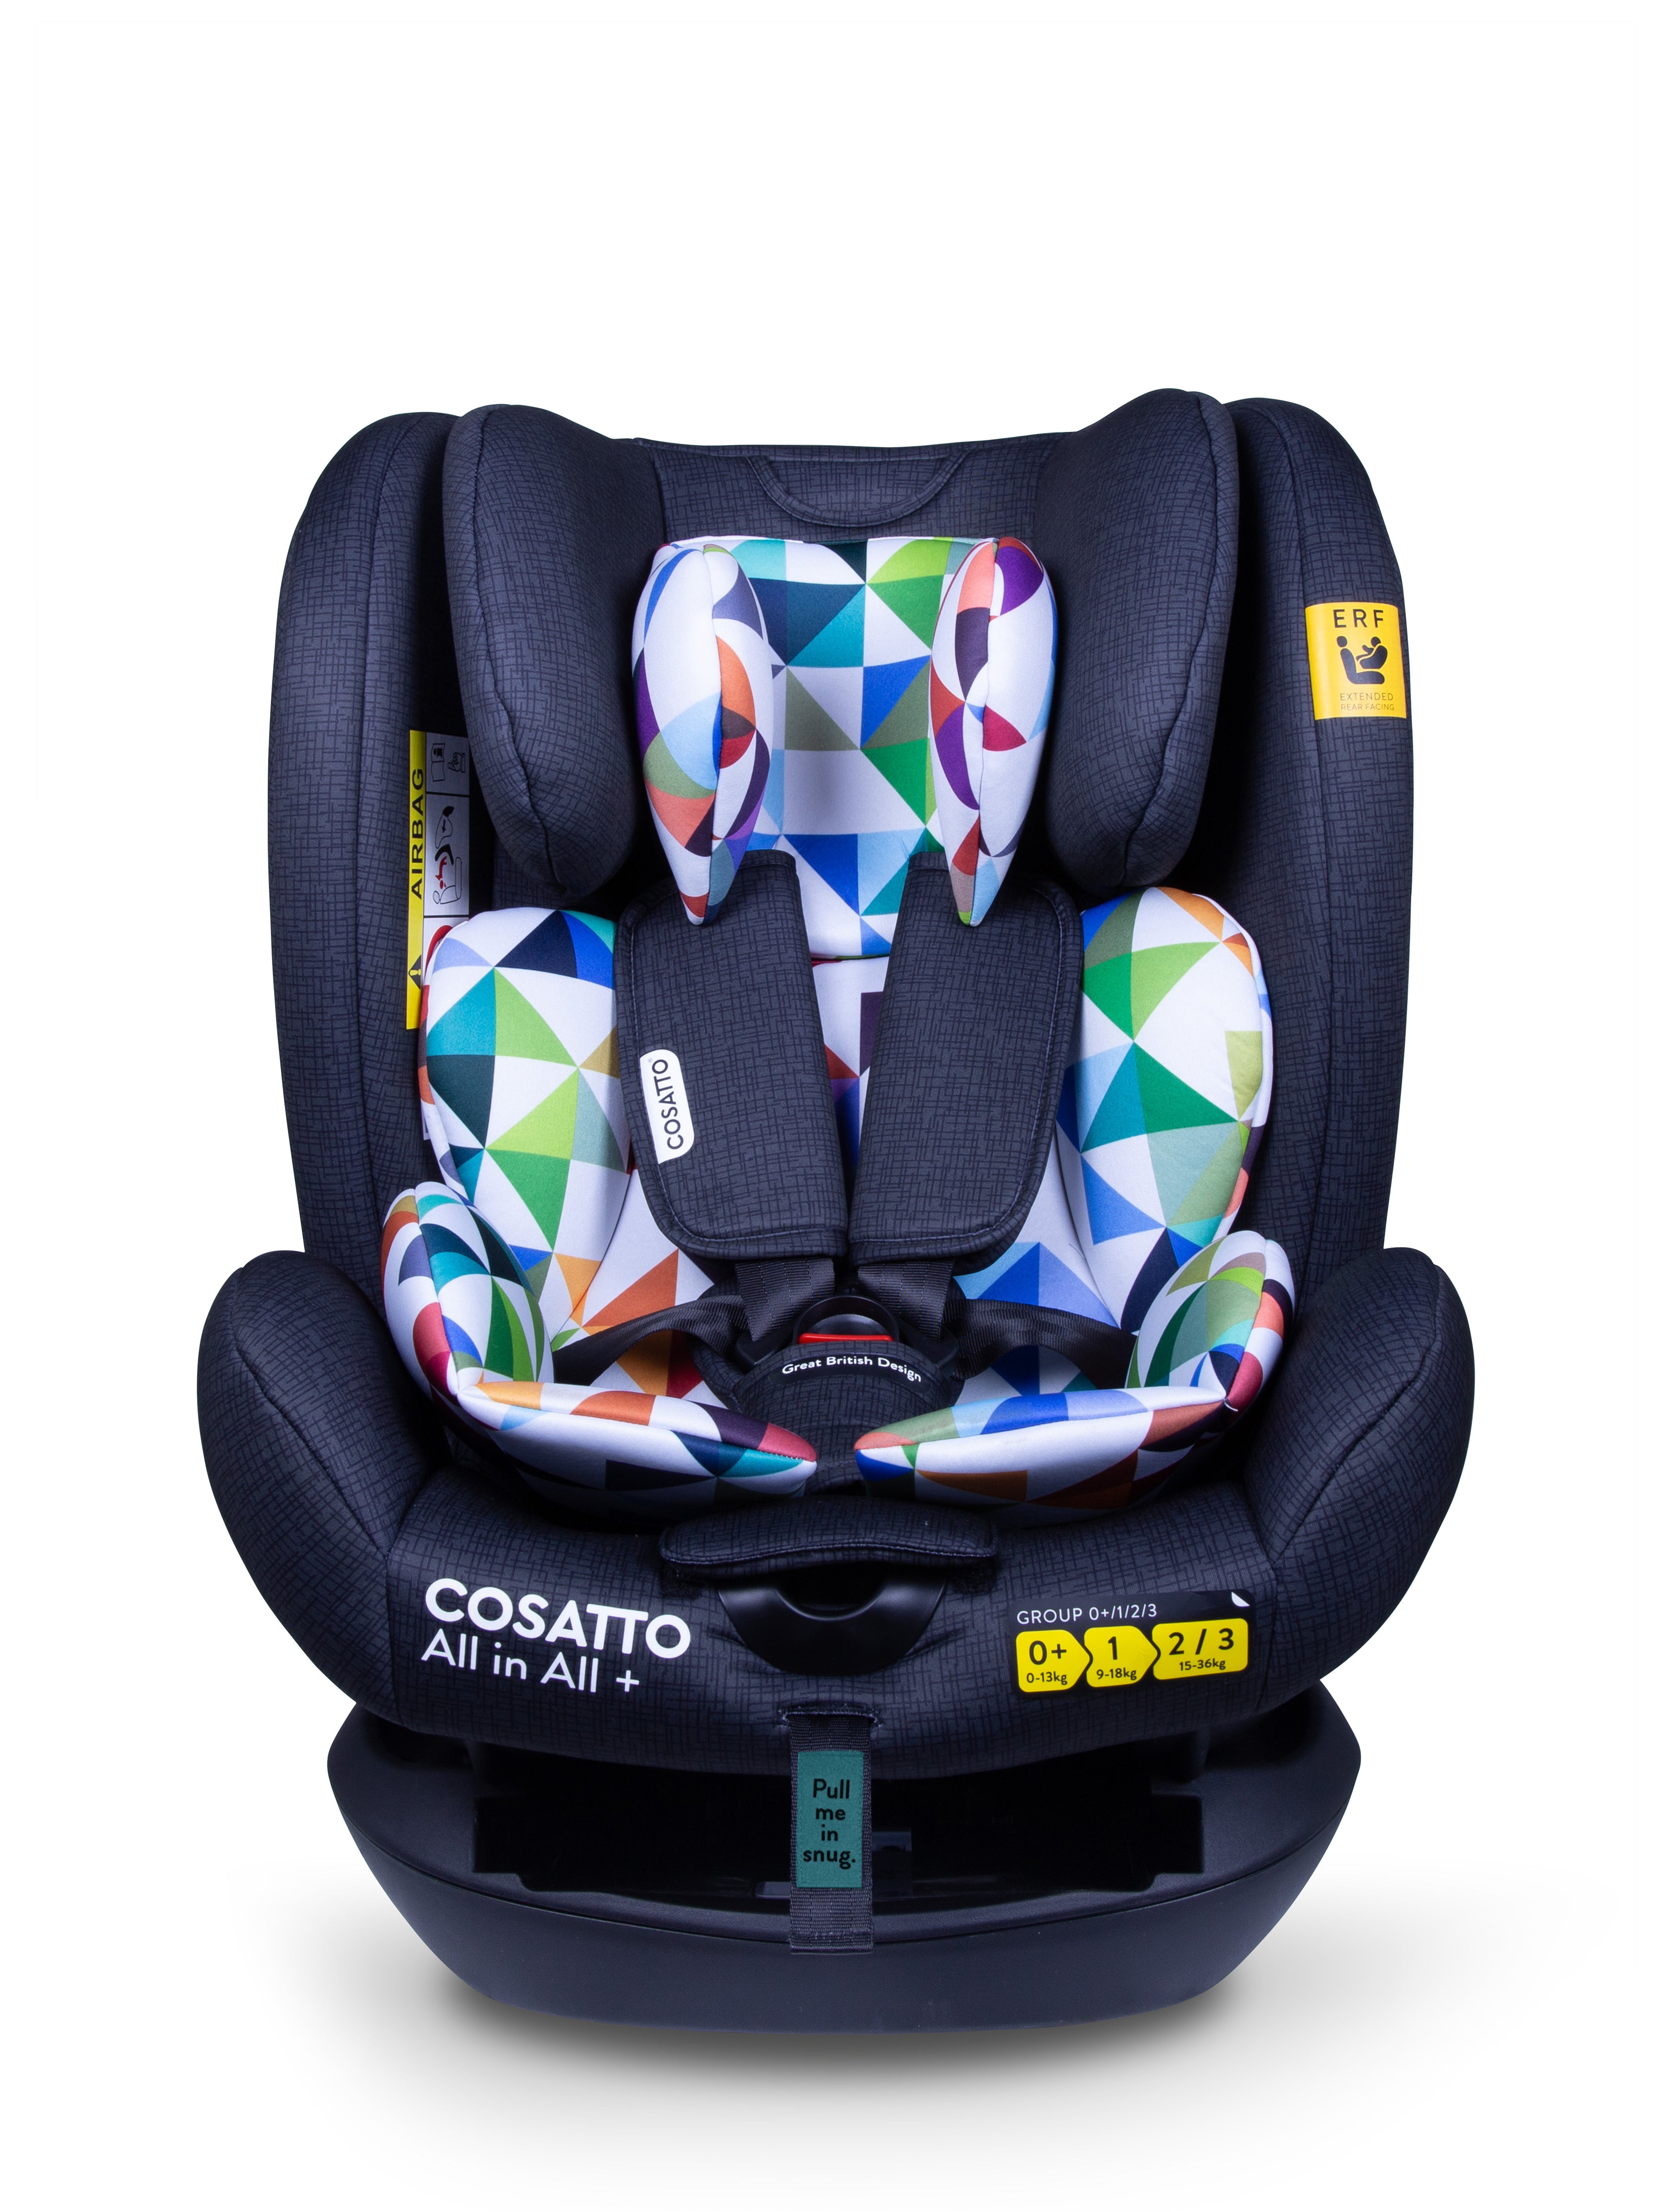 All in All + Group 0+123 Car Seat Spectroluxe